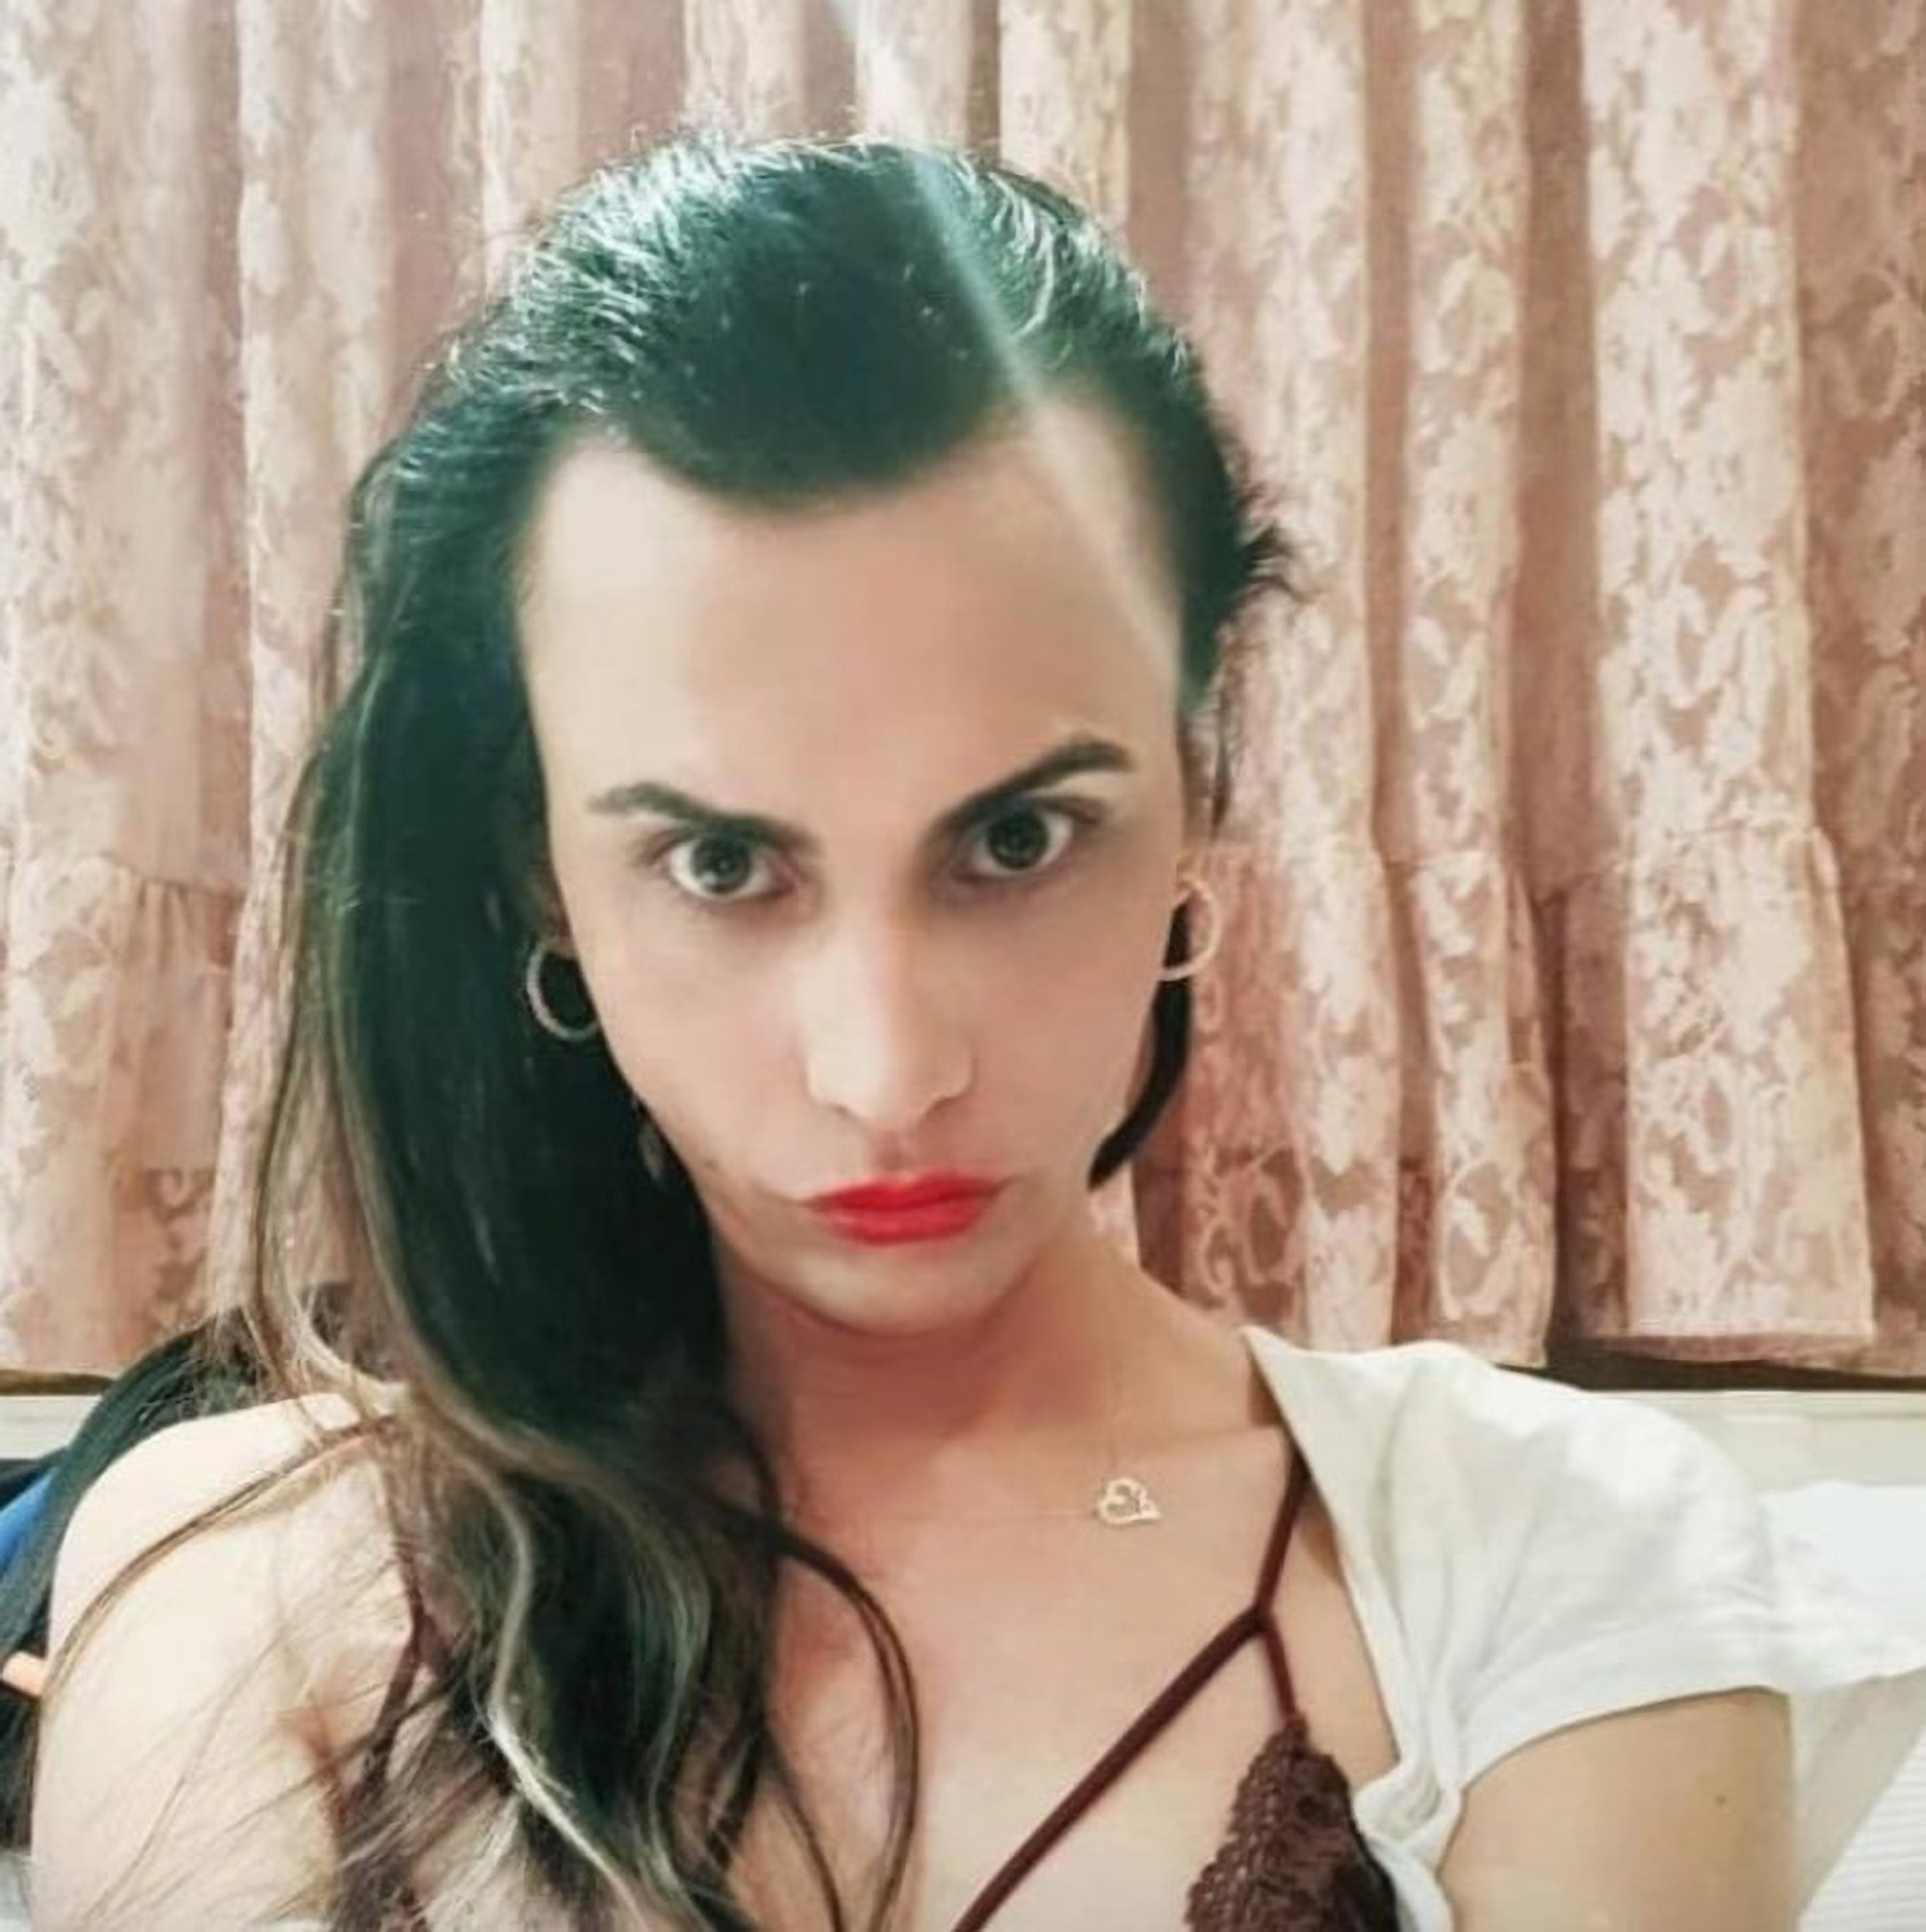 Read more about the article Dead Body Of Trans Woman Found Wrapped In Sheet In Sofa Bed